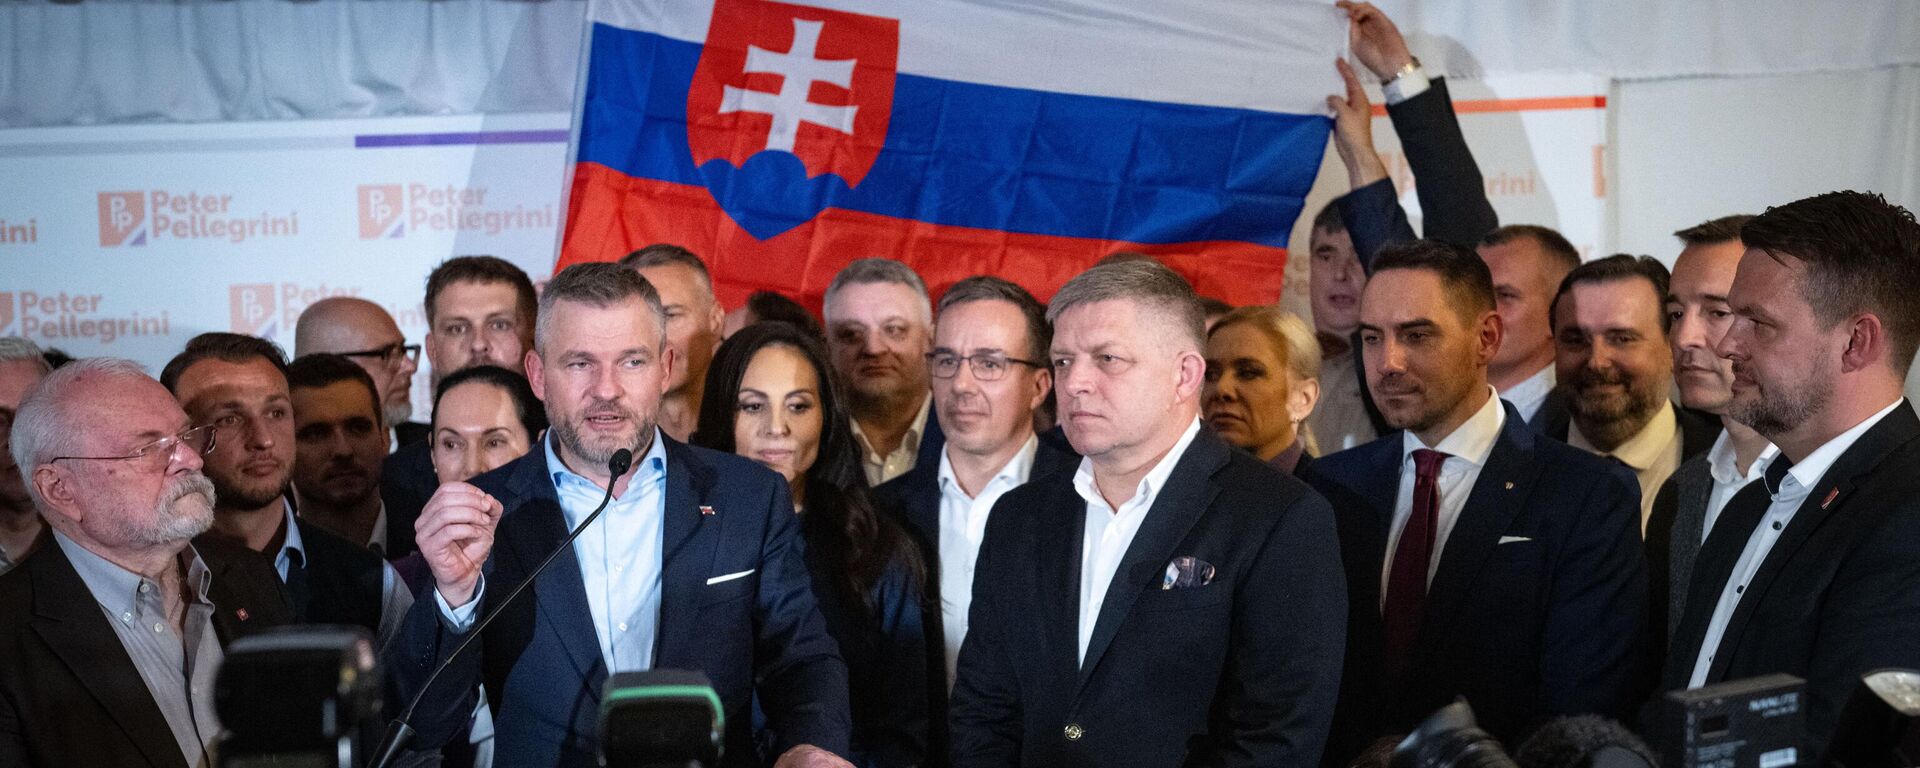 Peter Pellegrini (L) and Slovak Prime Minister Robert Fico (R) after the announcement of Pellegrini's victory in the second round of the Slovak presidential elections, April 6, 2024. - Sputnik International, 1920, 07.04.2024